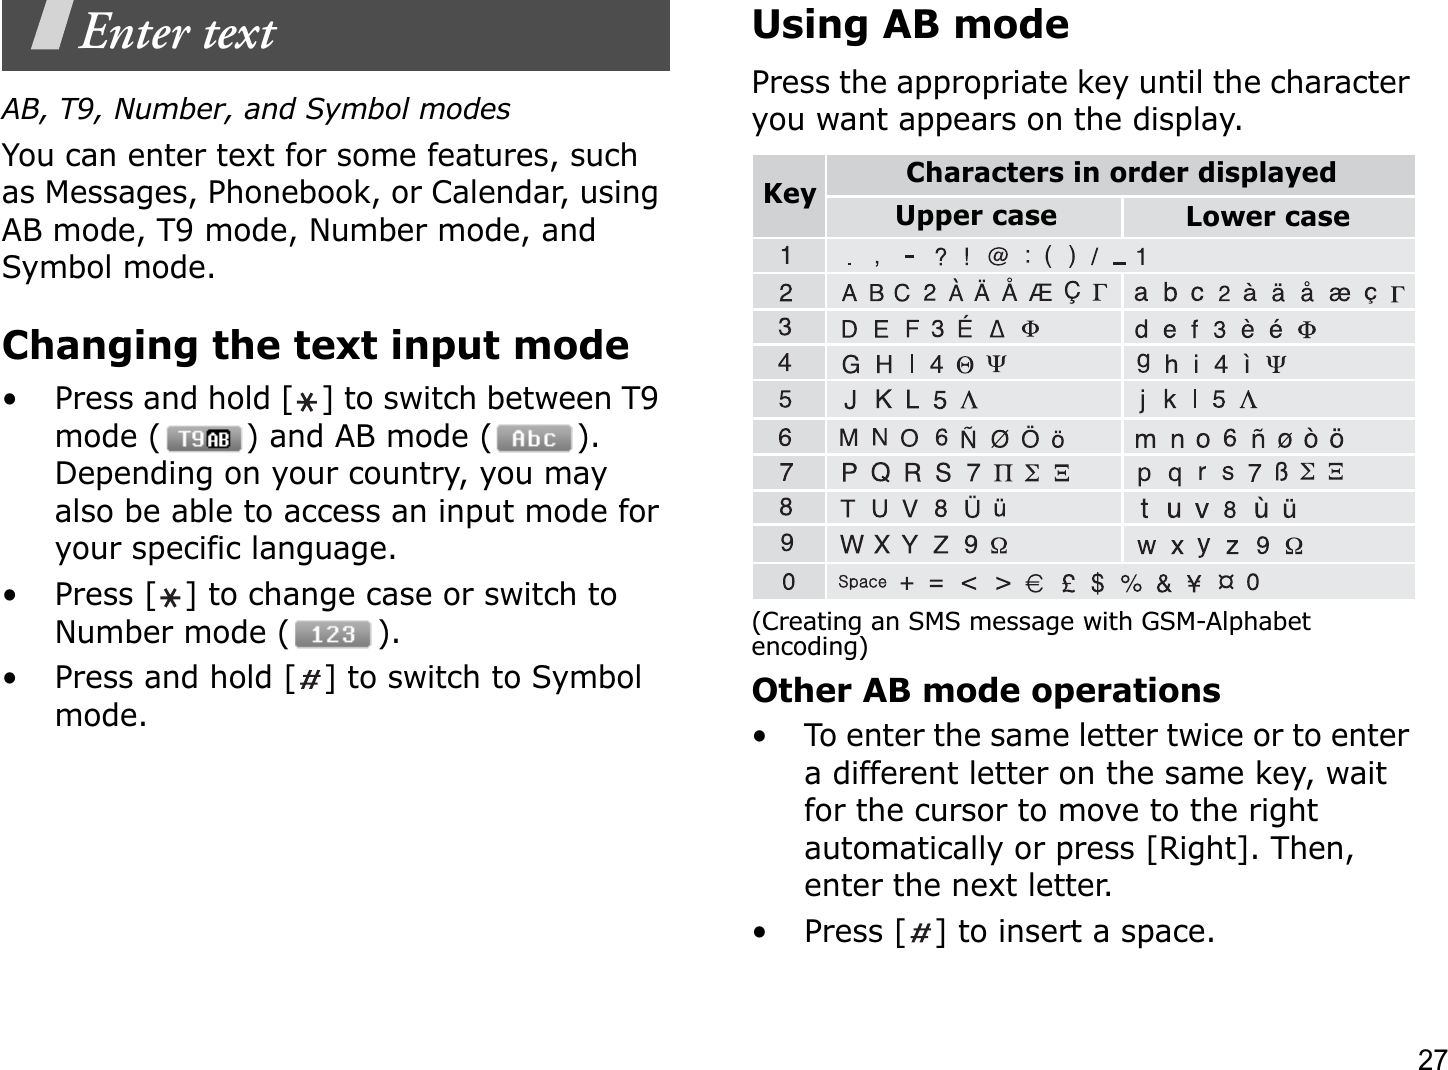 27Enter textAB, T9, Number, and Symbol modesYou can enter text for some features, such as Messages, Phonebook, or Calendar, using AB mode, T9 mode, Number mode, and Symbol mode.Changing the text input mode• Press and hold [ ] to switch between T9 mode ( ) and AB mode ( ). Depending on your country, you may also be able to access an input mode for your specific language.• Press [ ] to change case or switch to Number mode ( ).• Press and hold [ ] to switch to Symbol mode.Using AB modePress the appropriate key until the character you want appears on the display.(Creating an SMS message with GSM-Alphabet encoding)Other AB mode operations• To enter the same letter twice or to enter a different letter on the same key, wait for the cursor to move to the right automatically or press [Right]. Then, enter the next letter.• Press [ ] to insert a space.Characters in order displayedKey Upper case Lower case